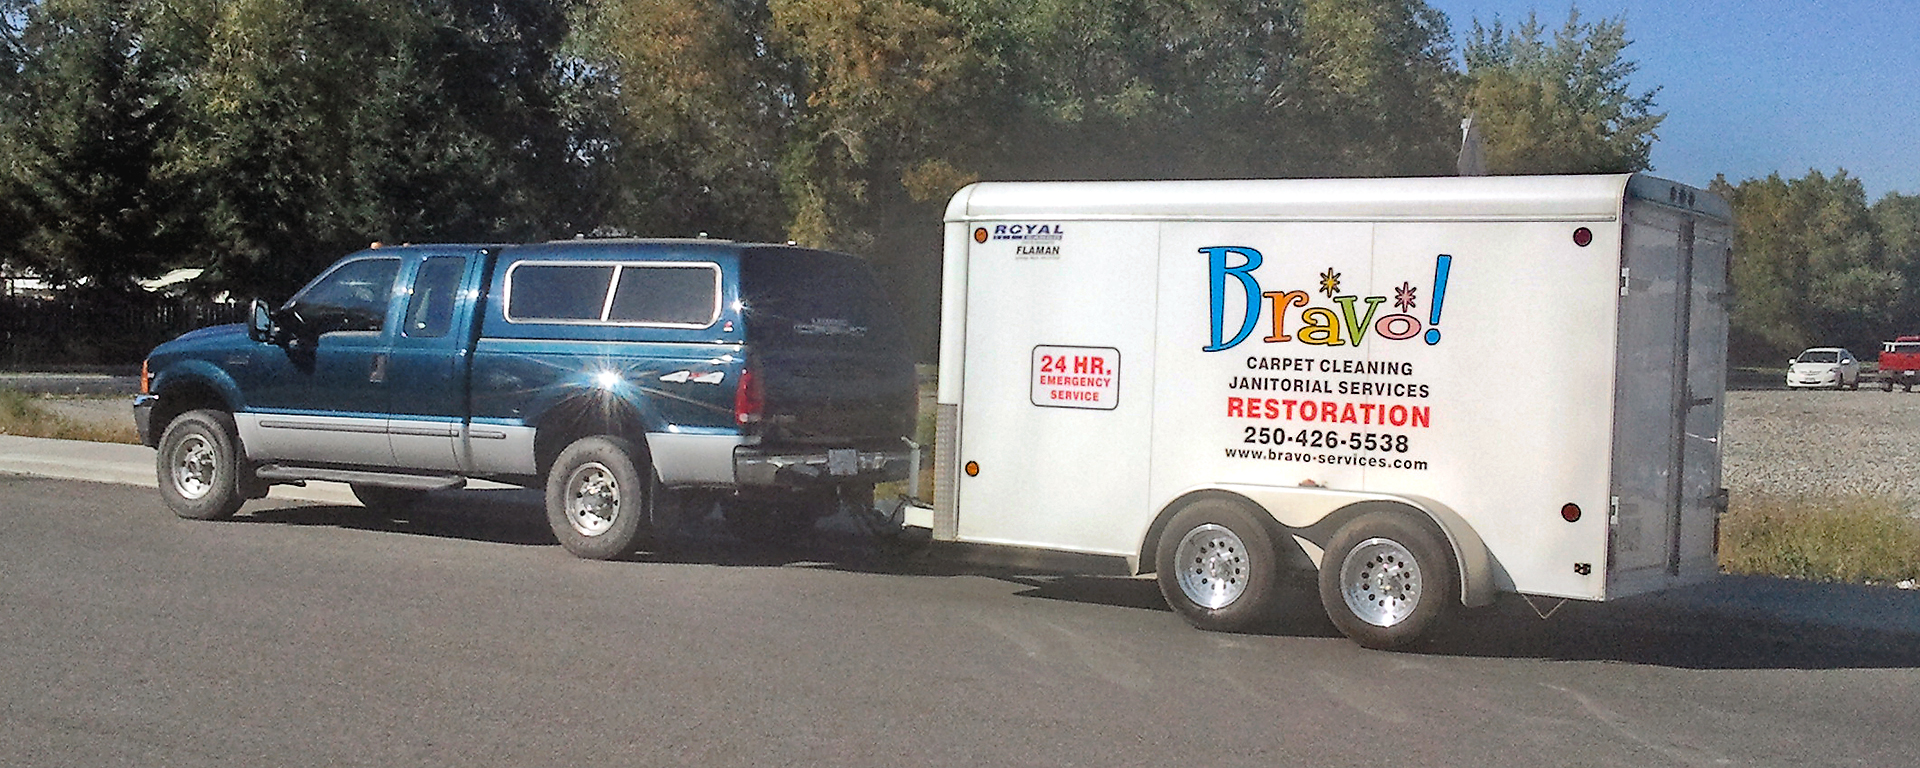 a blue-green truck with a canopy towing a trailer with the Bravo carpet cleaning logo painted on the side 